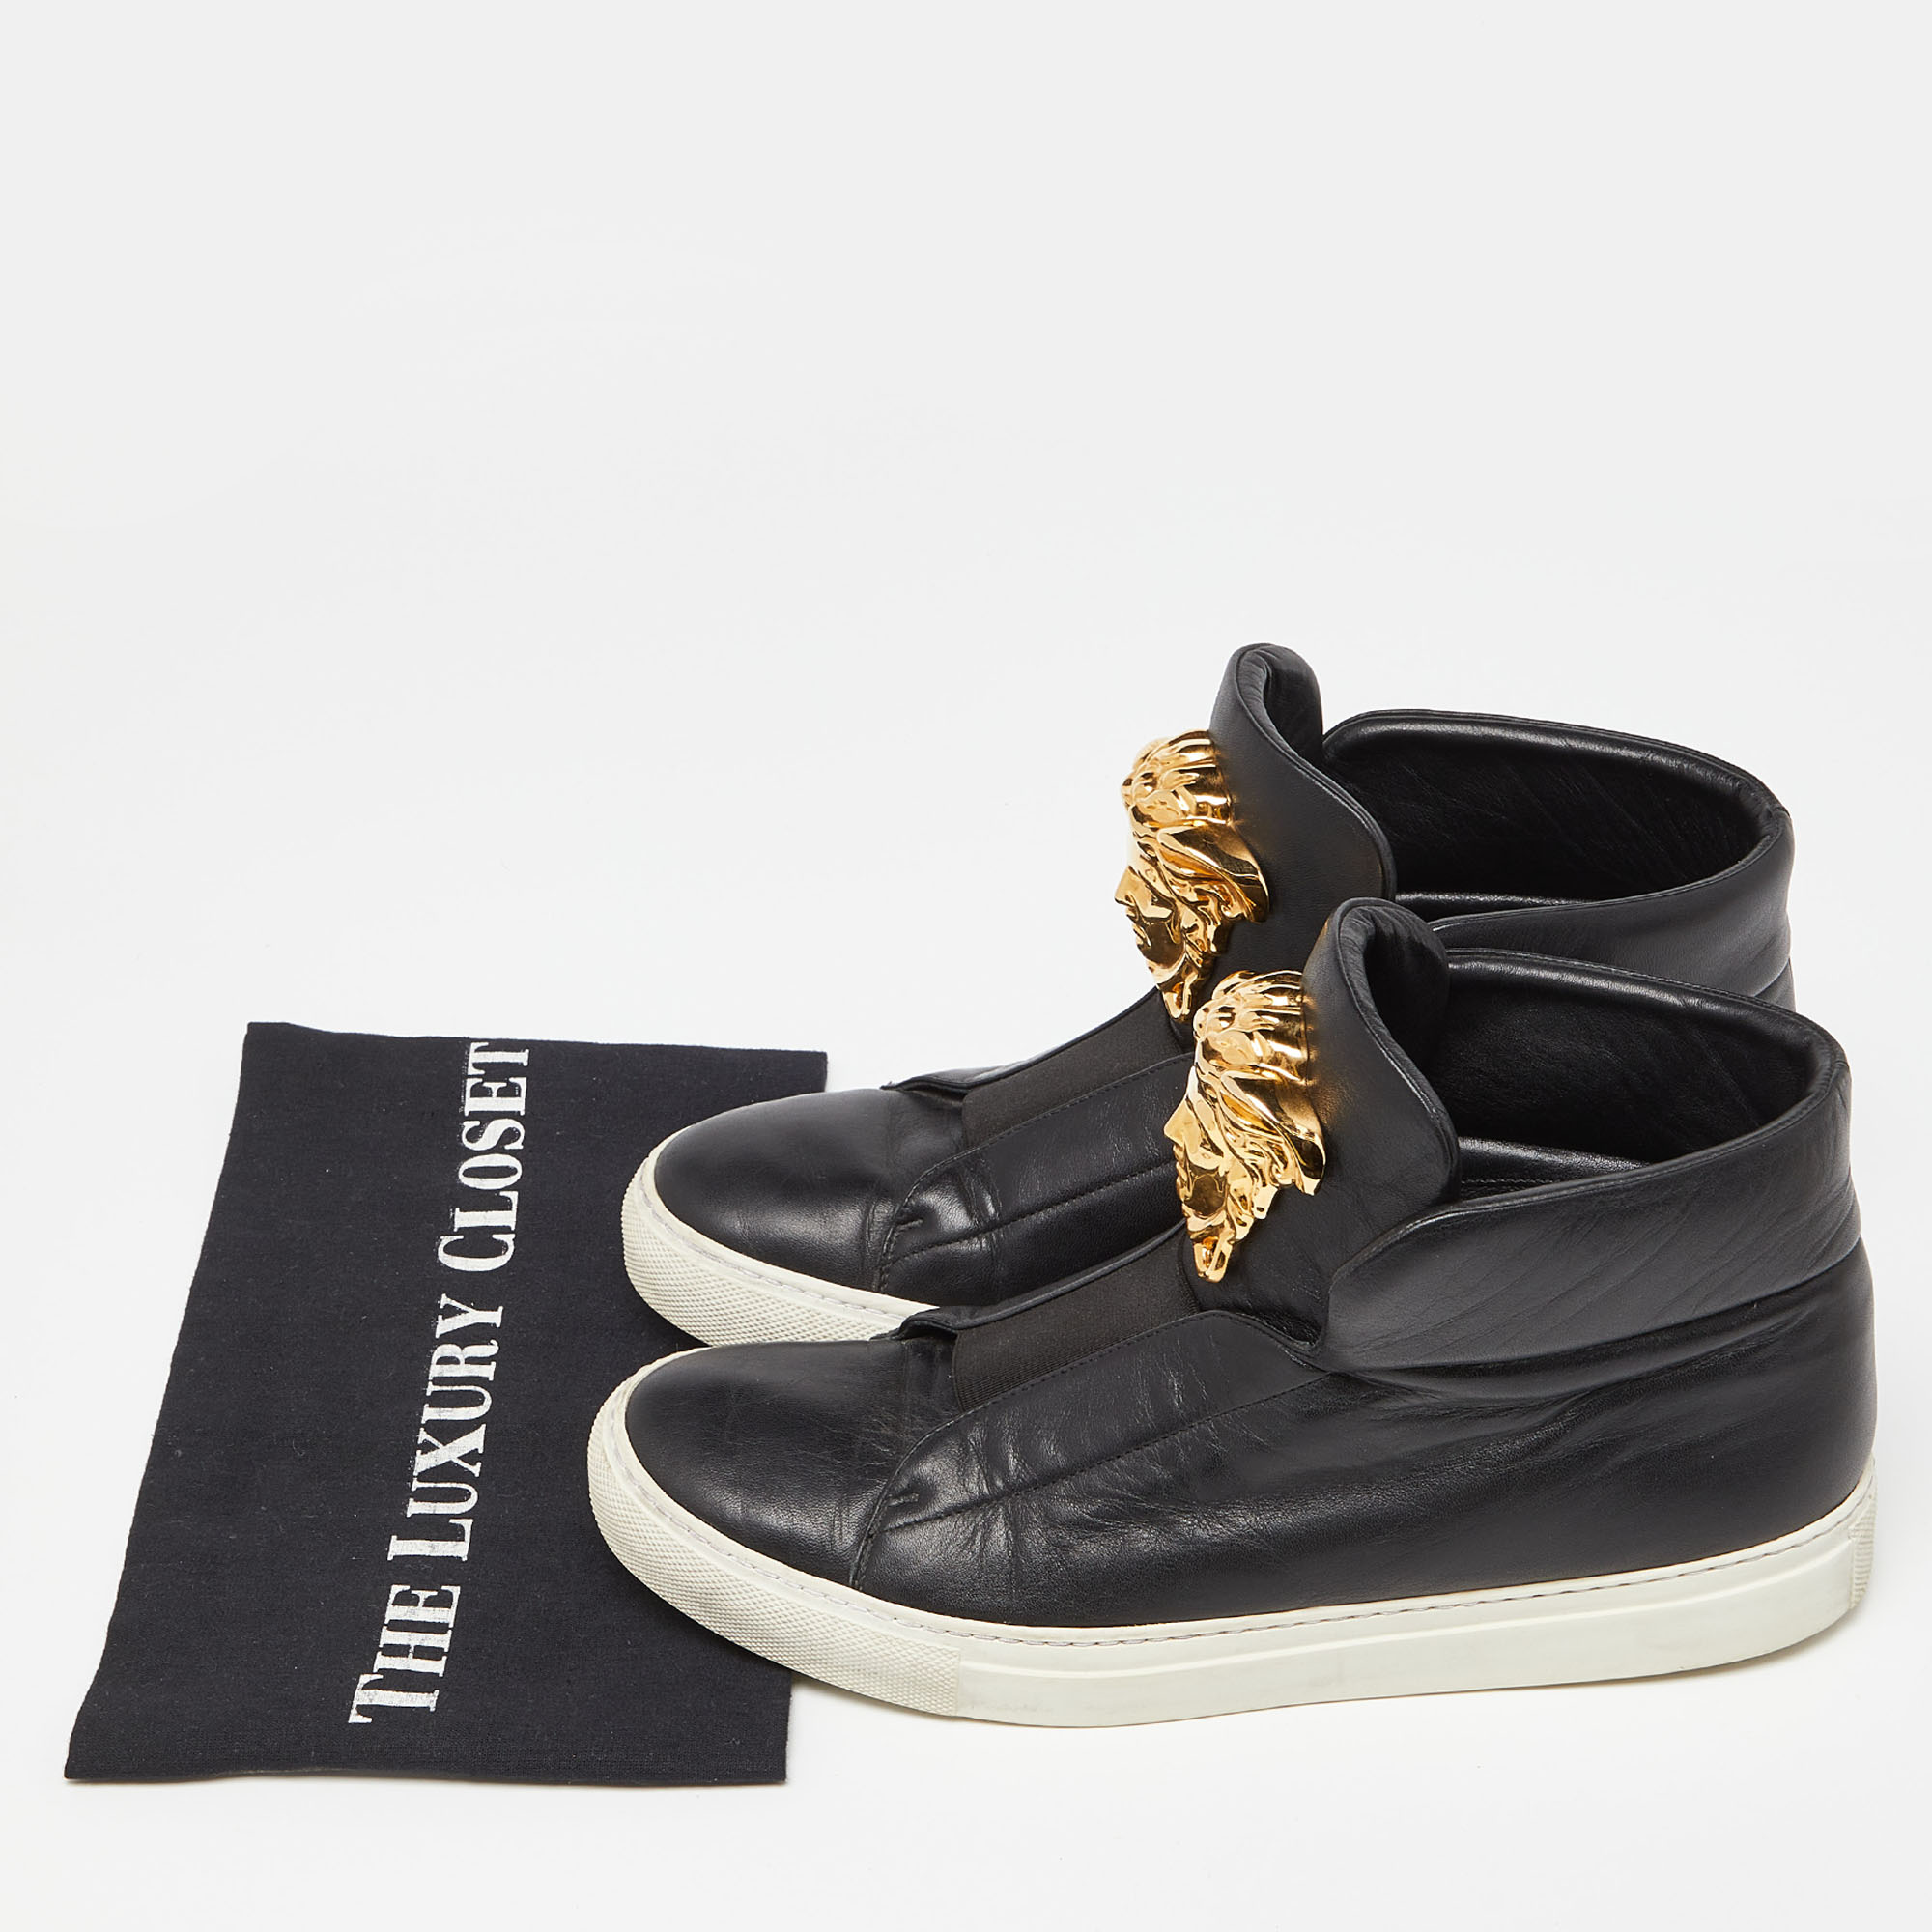 Versace Black Leather Medusa High Top Sneakers Size 40